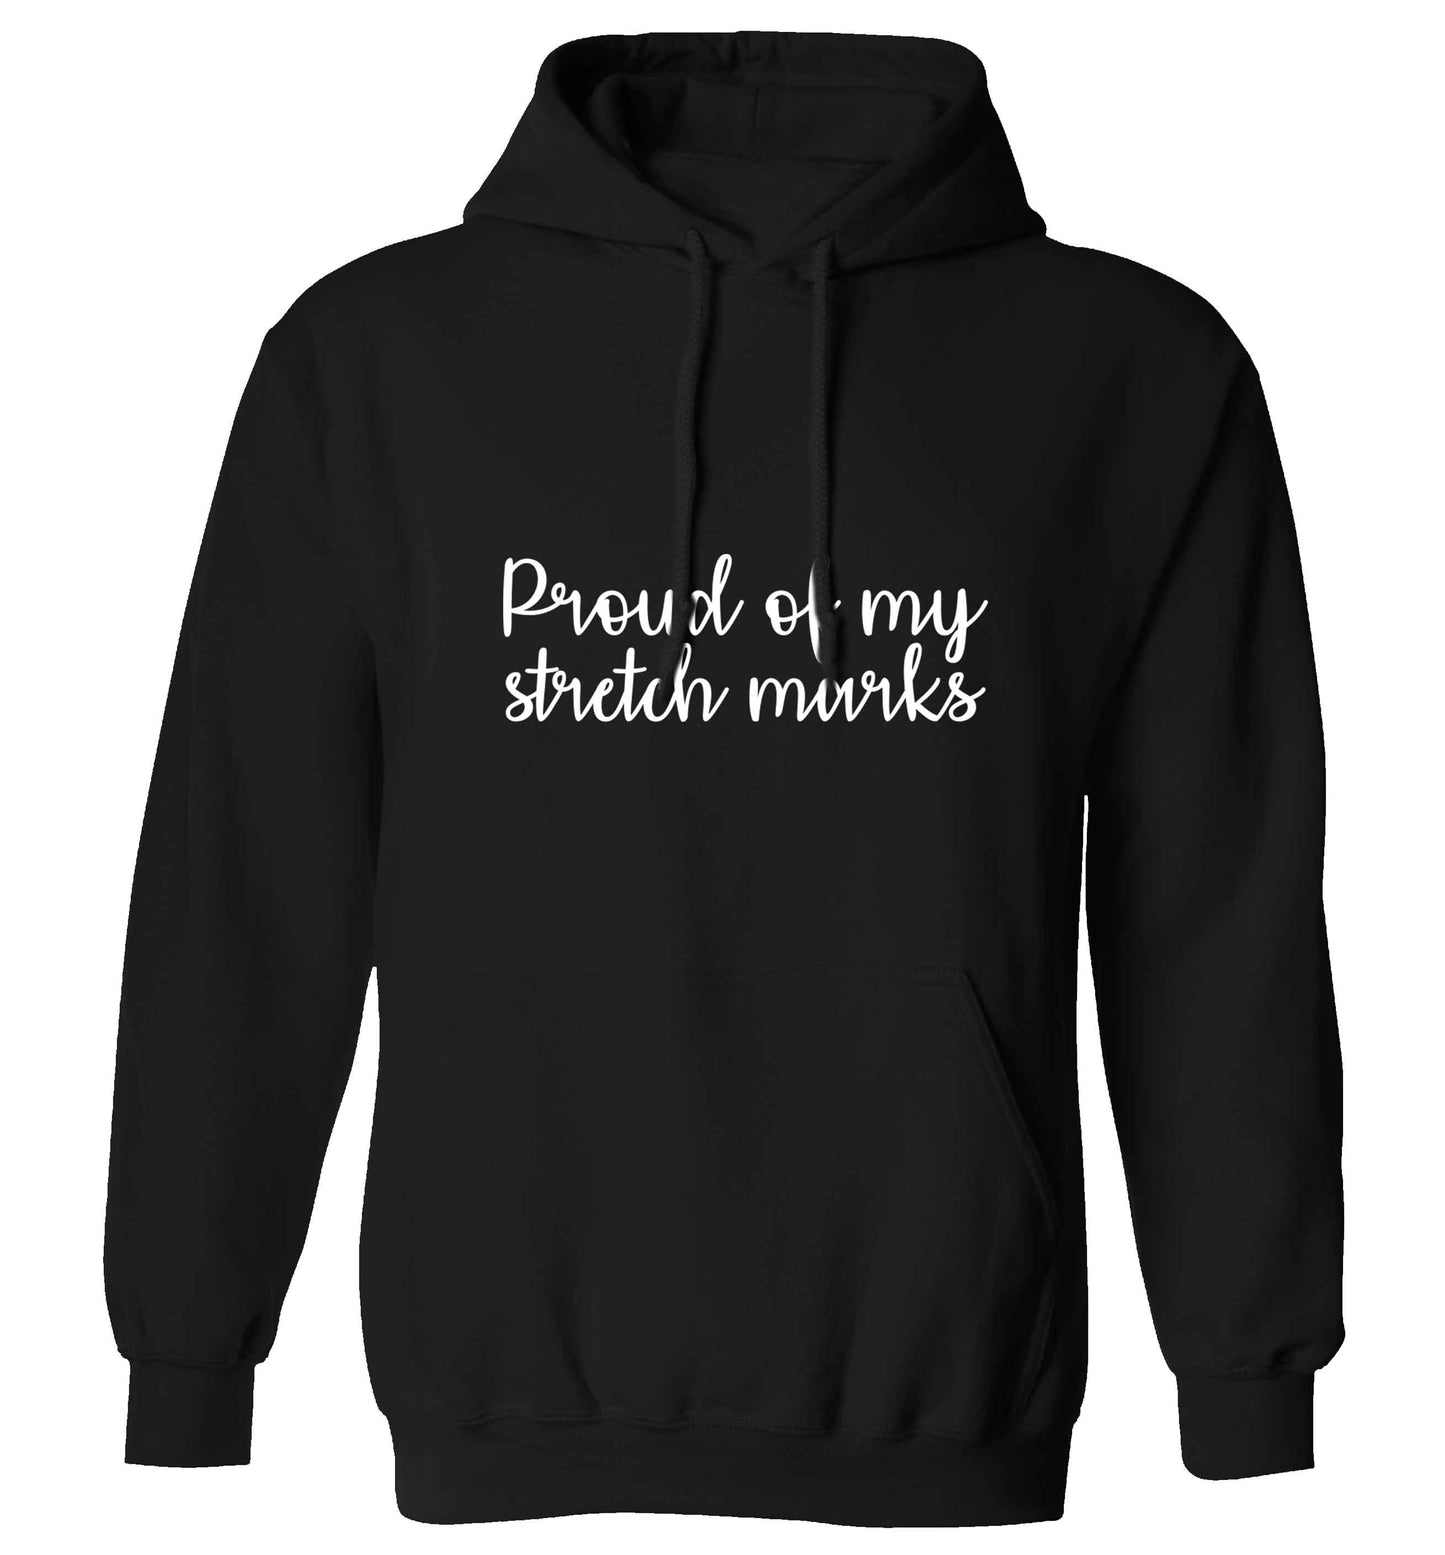 Proud of my stretch marks adults unisex black hoodie 2XL